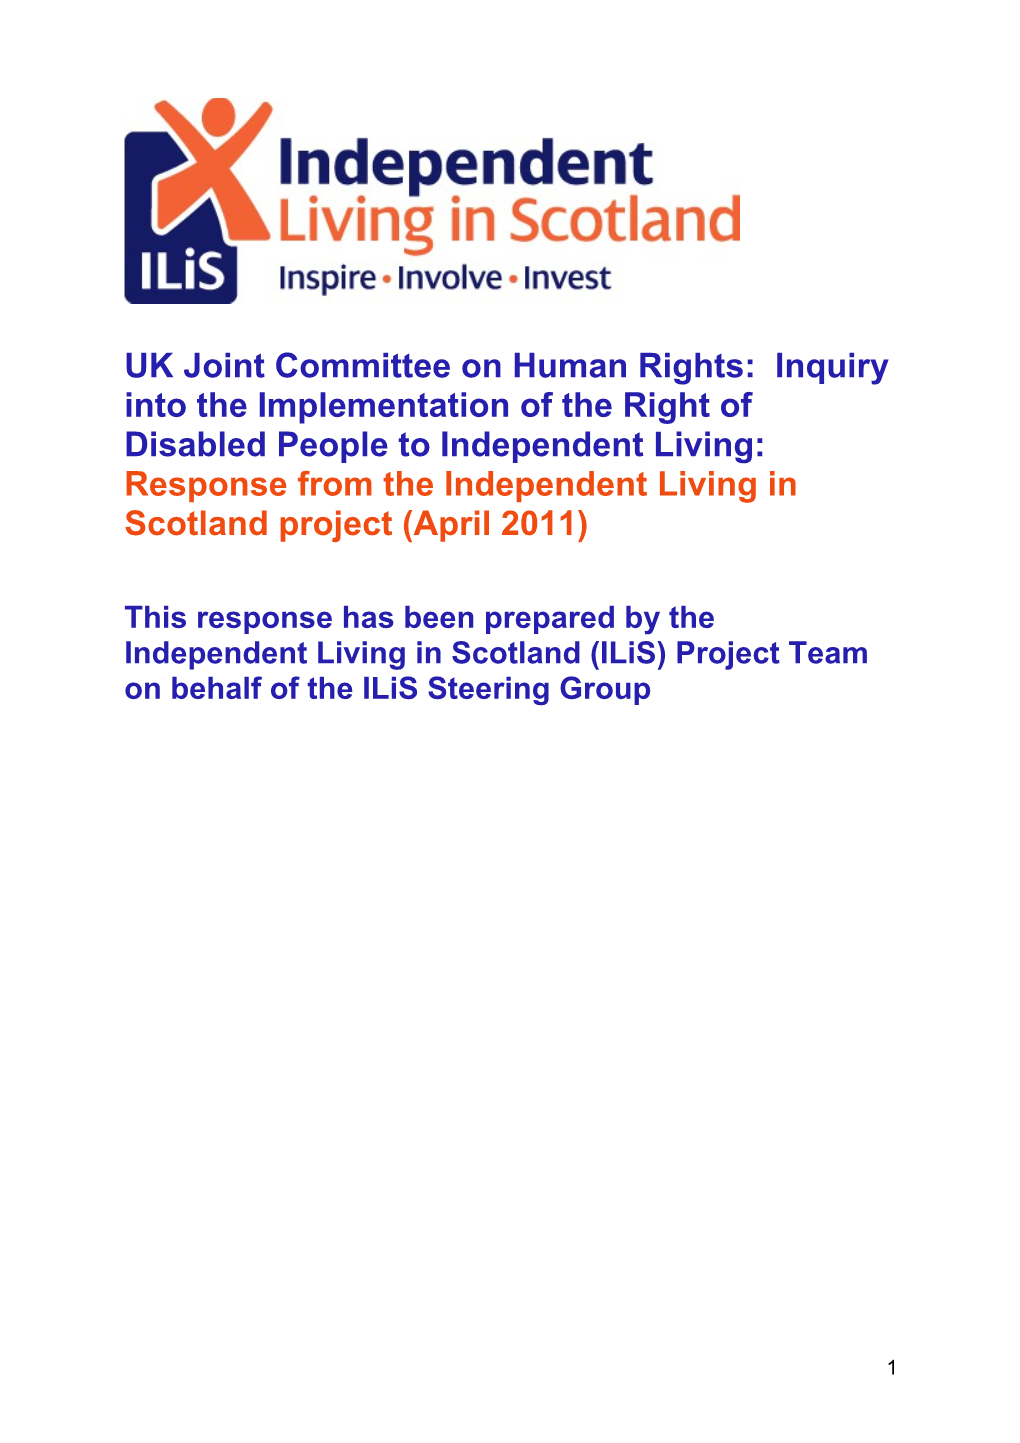 This Response Has Been Prepared by the Independent Living in Scotland (Ilis) Project Team